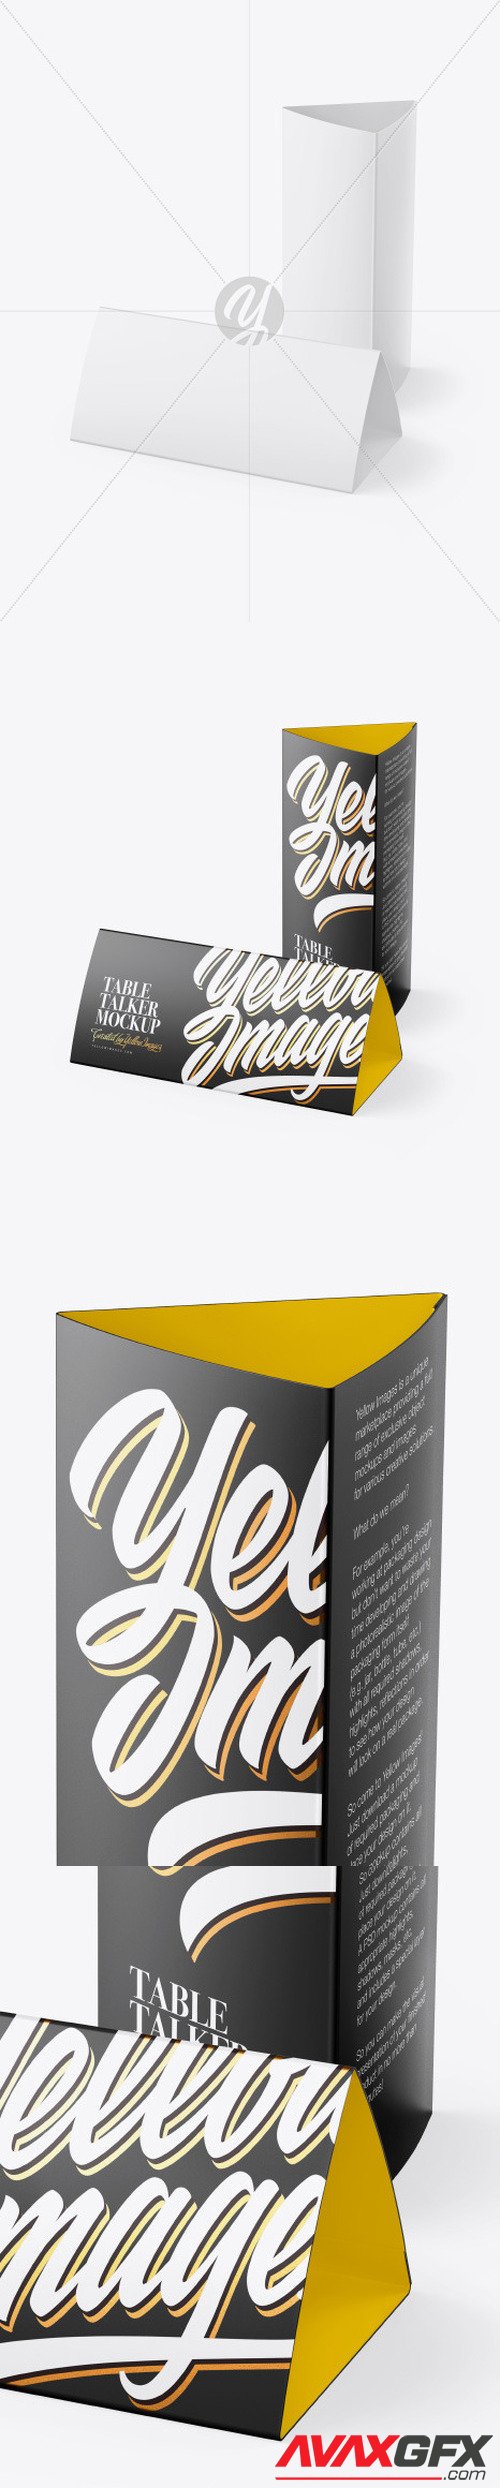 Two Table Talkers Mockup 58693 TIF